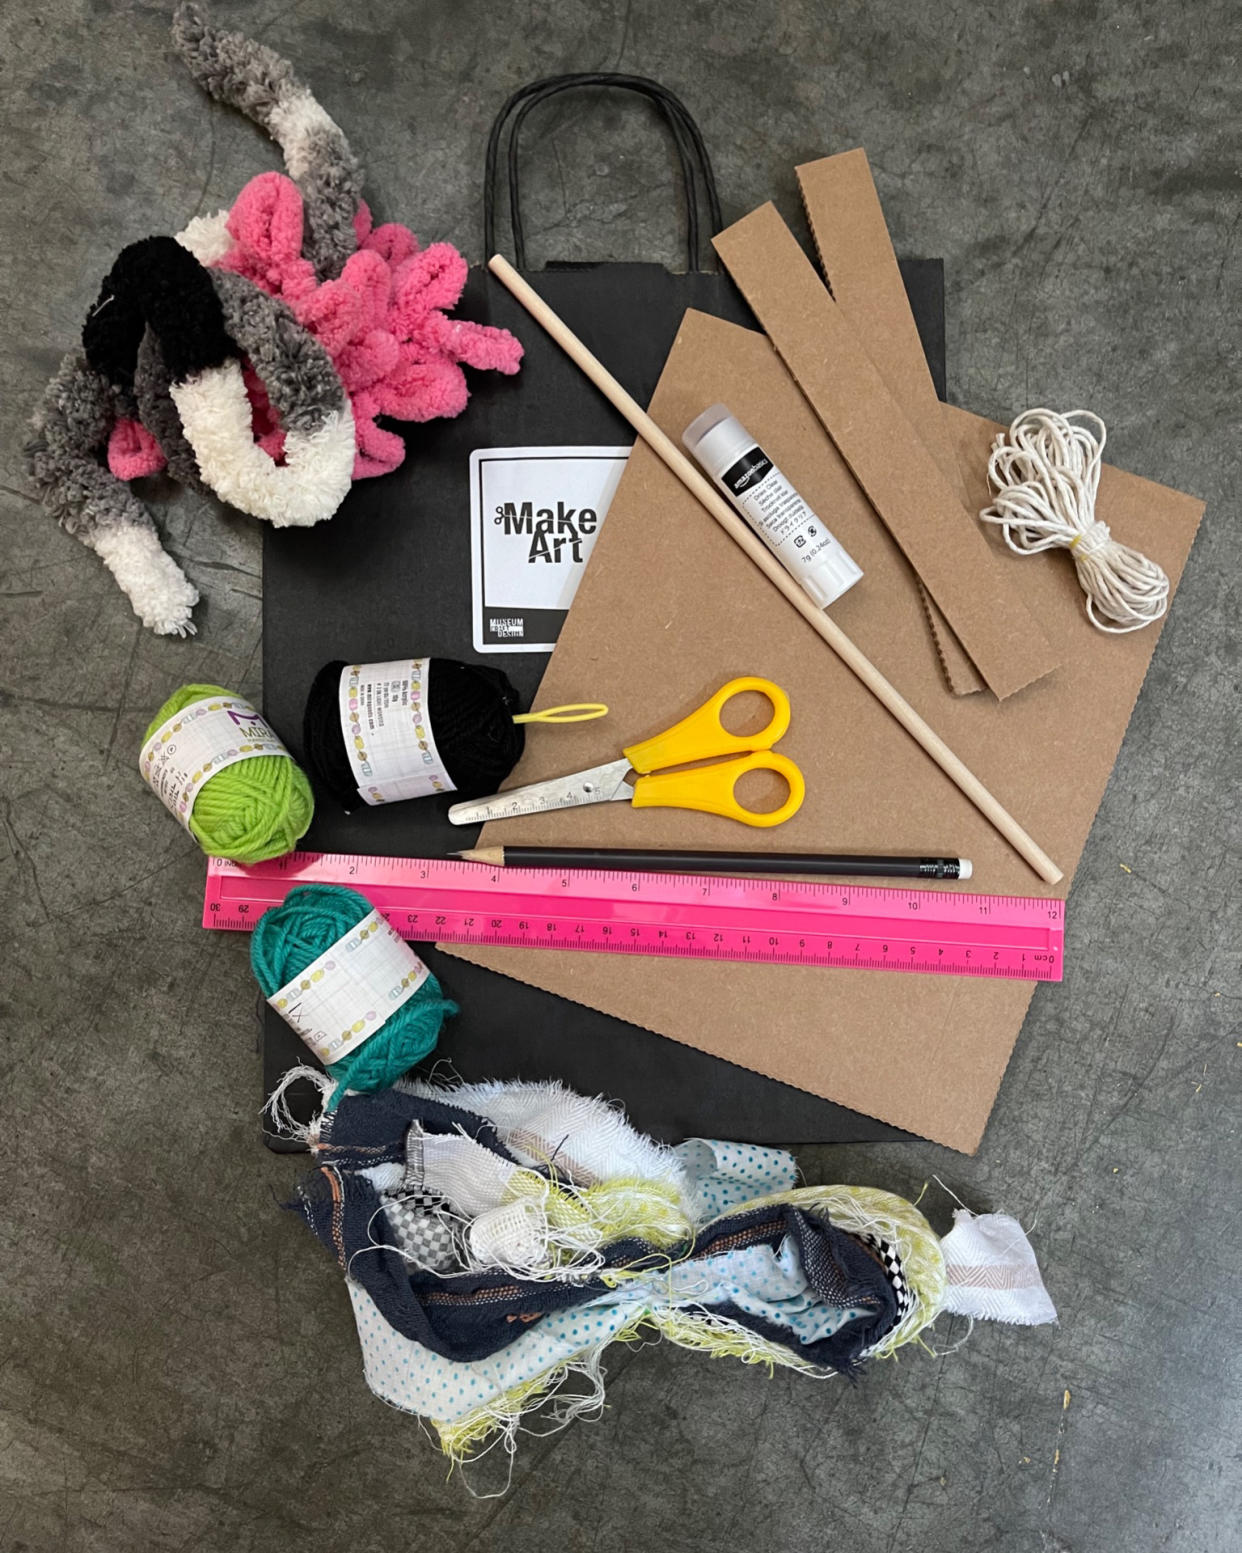 The Museum of Craft and Design in San Francisco is offering art kits to Museum Day visitors. (Courtesy of SF Museum)